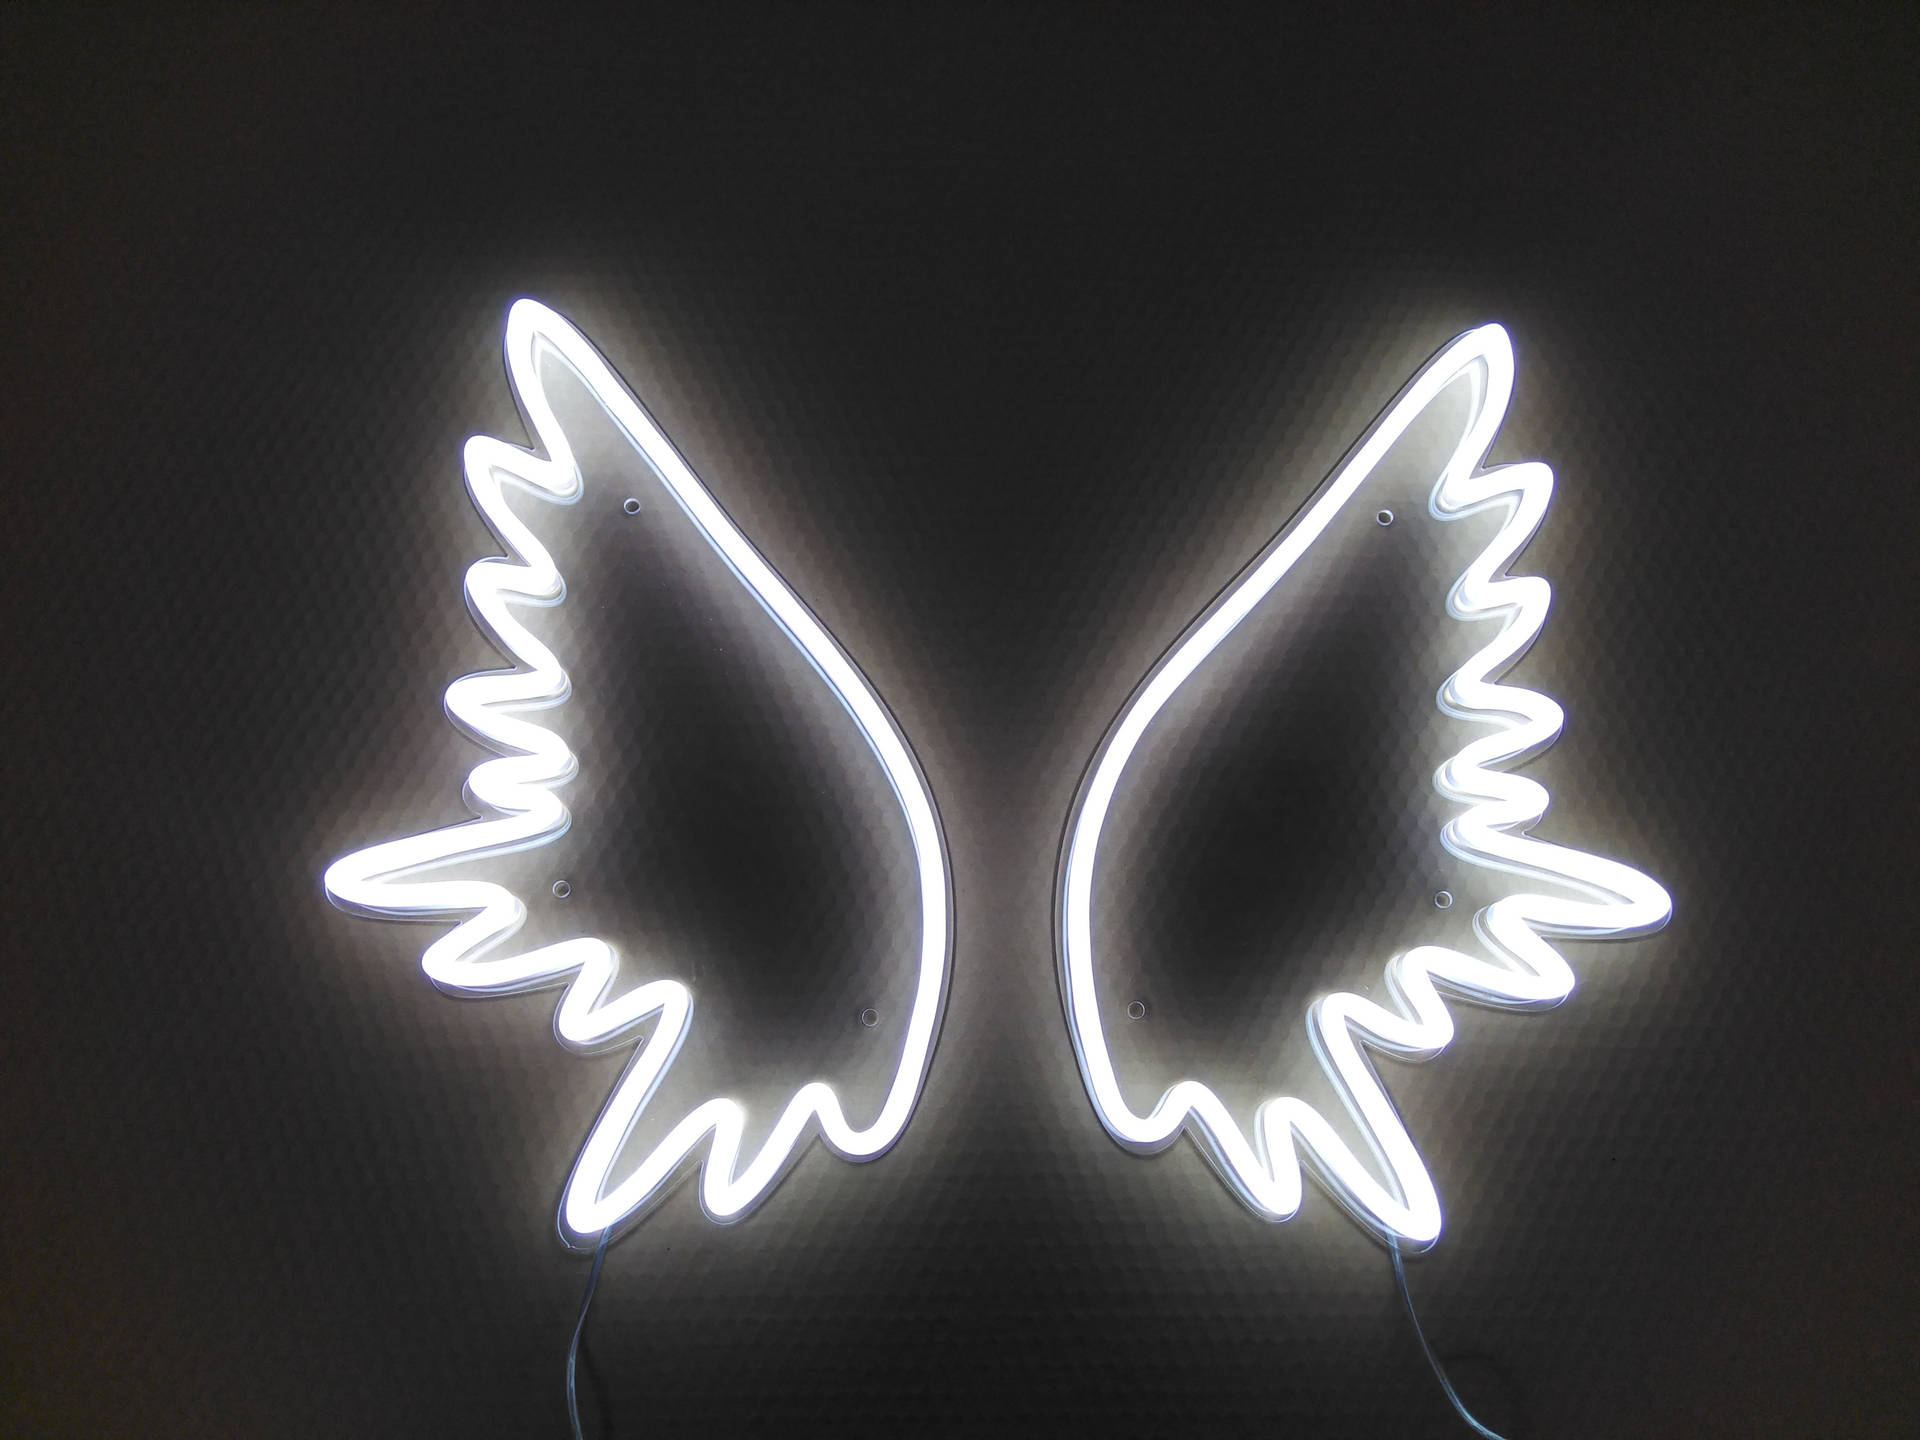 A pair of white wings on a black background - Wings